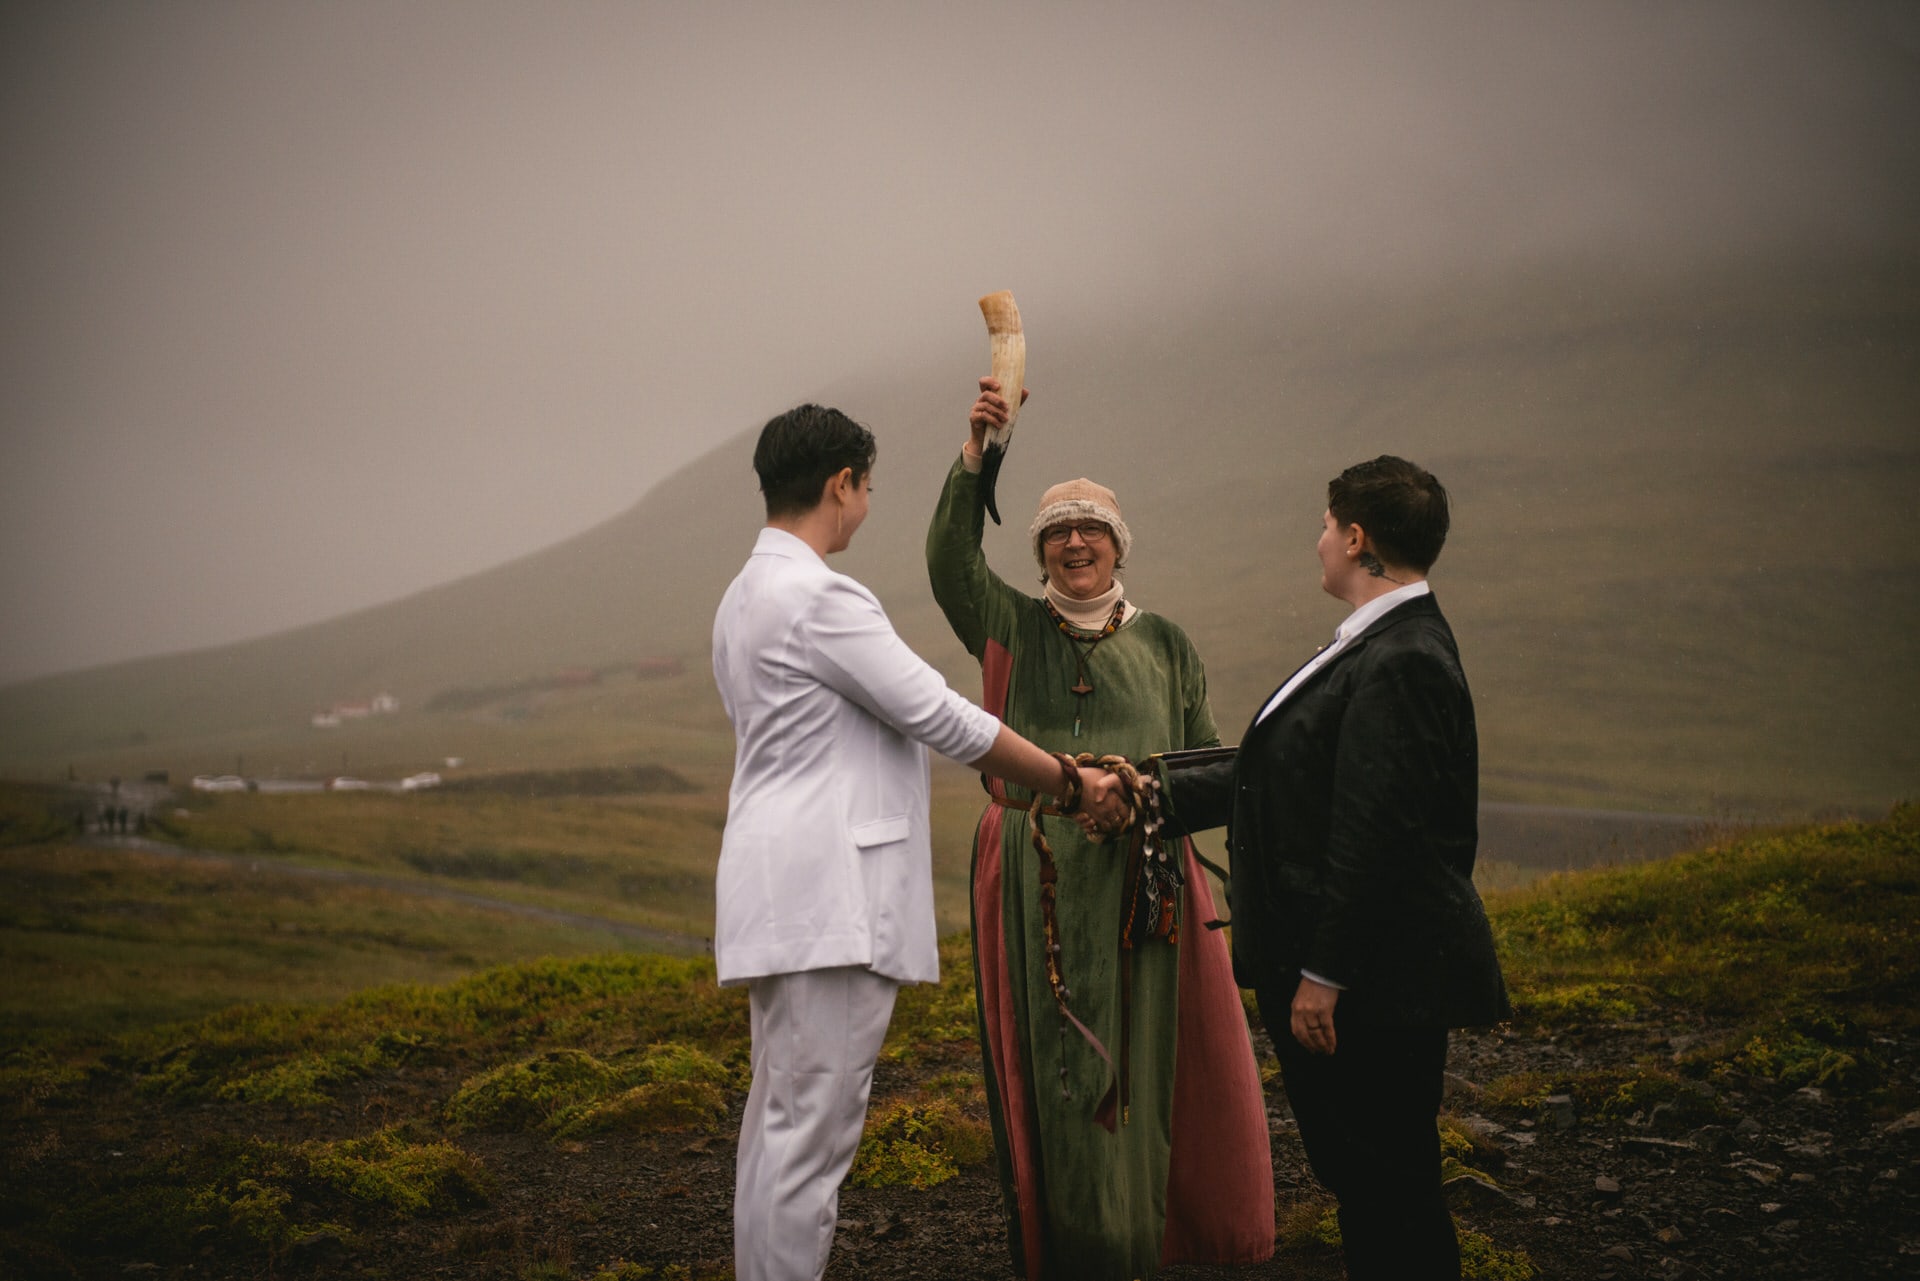 End of a Pagan wedding ceremony in Iceland